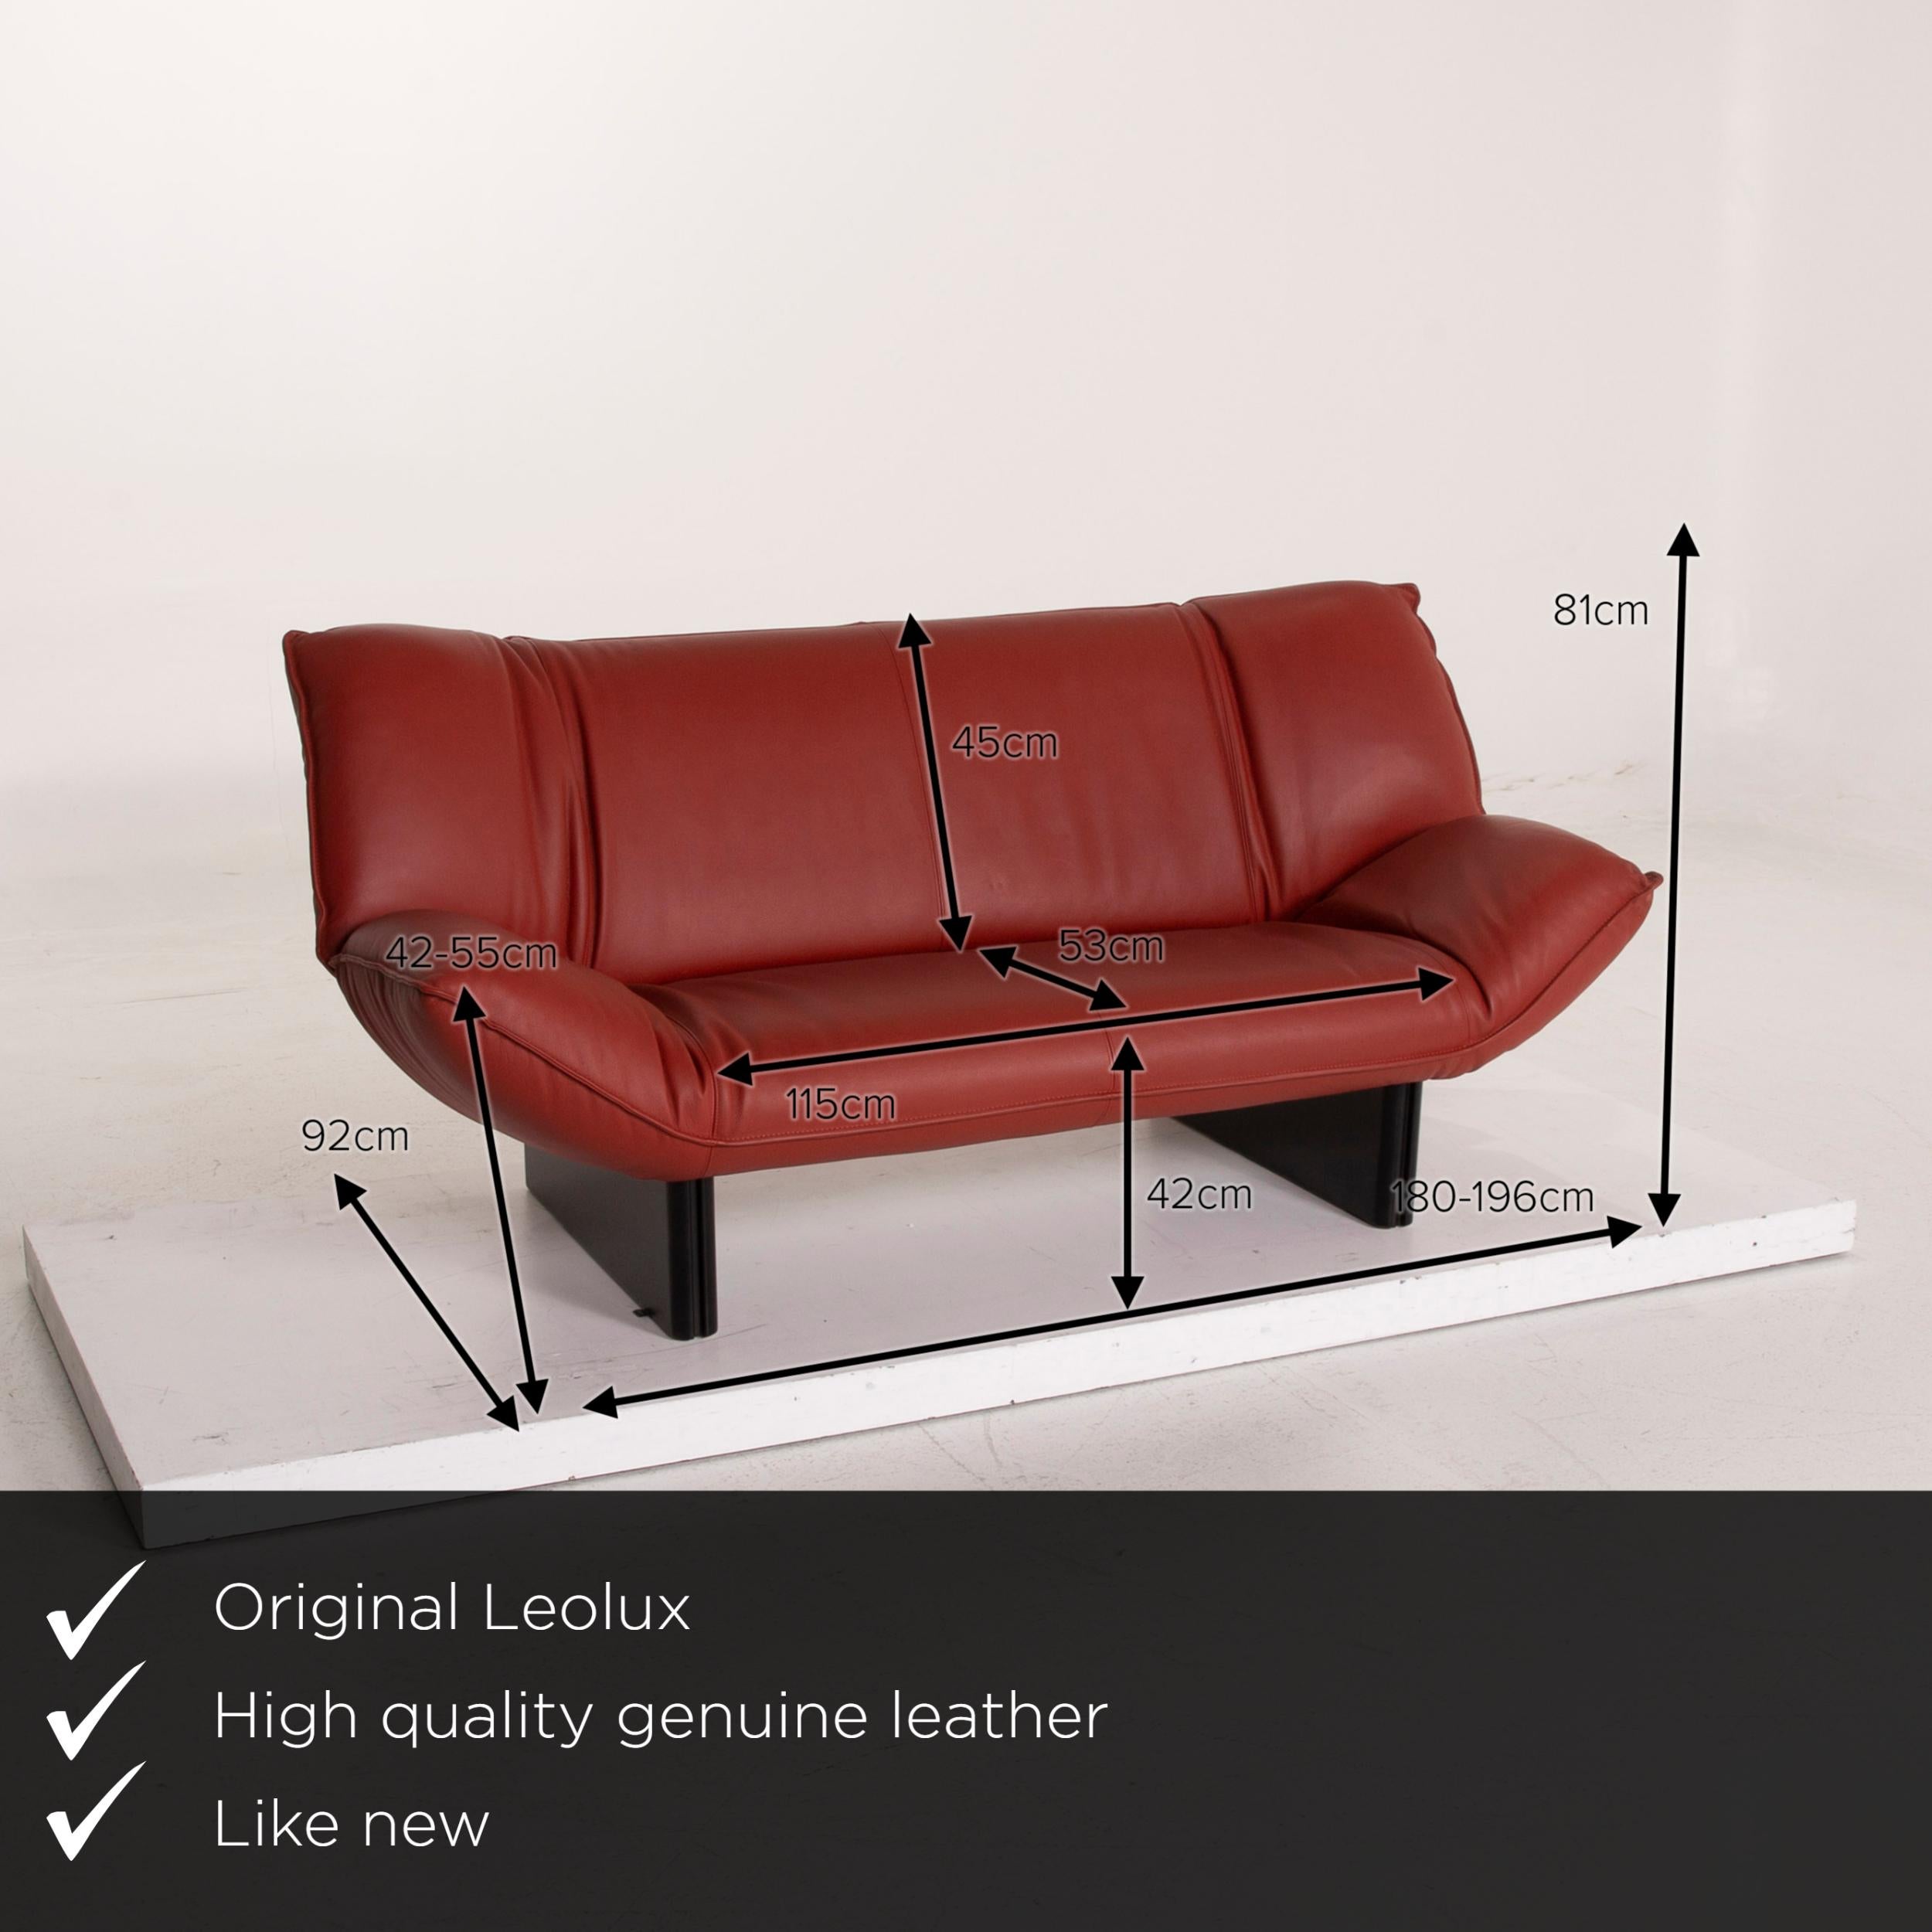 We present to you a Leolux Tango leather sofa dark red three-seat.

 

 Product measurements in centimeters:
 

Depth 92
Width 196
Height 81
Seat height 42
Rest height 42
Seat depth 53
Seat width 115
Back height 45.
    